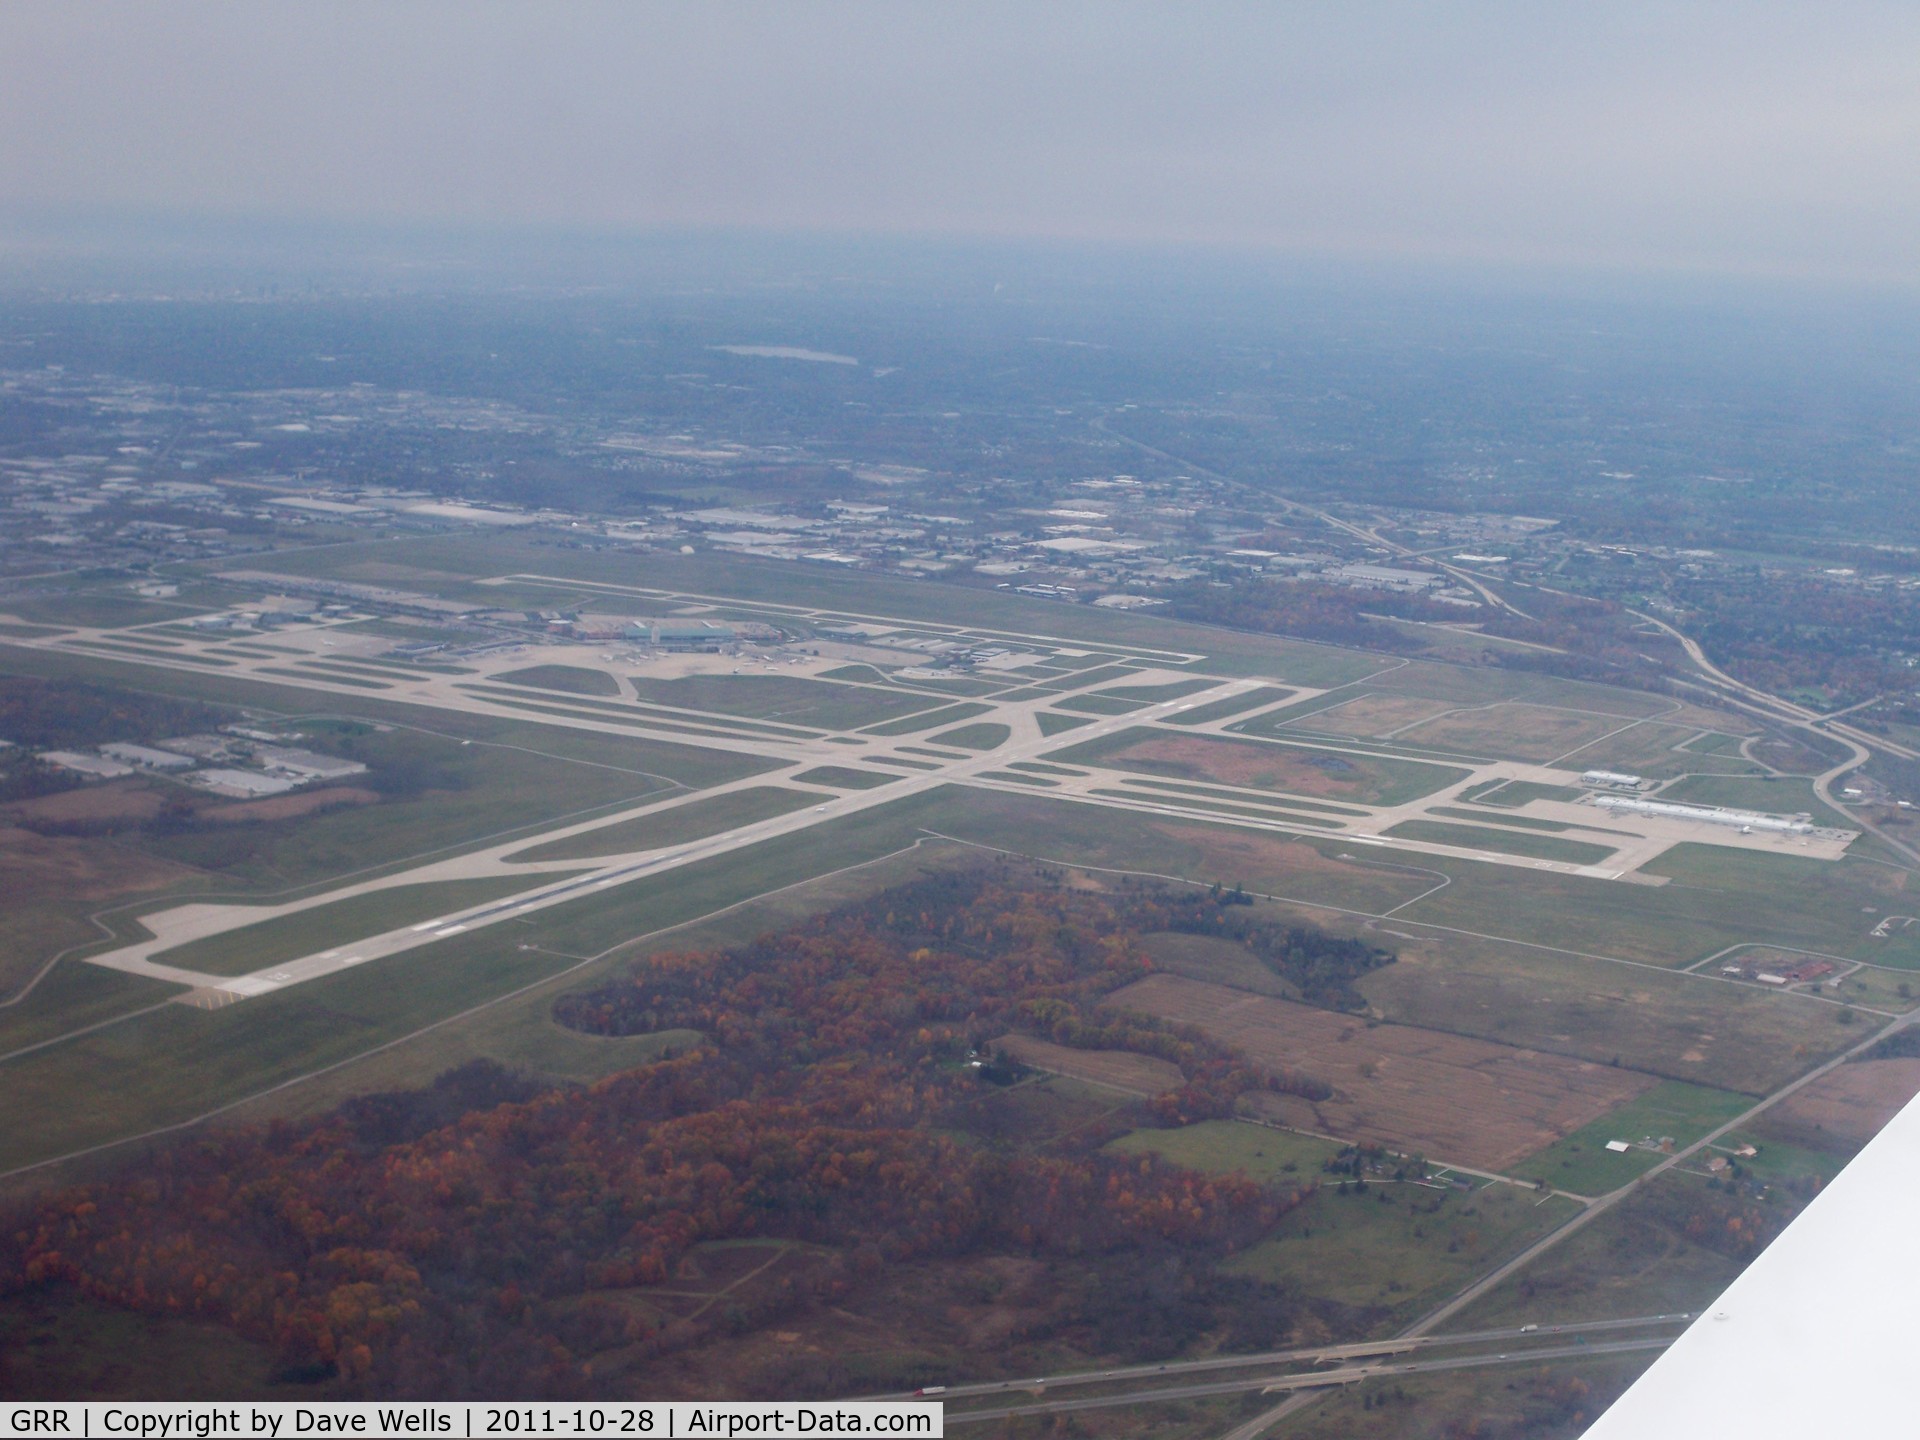 Gerald R. Ford International Airport (GRR) - View of Grand Rapids airport from the South East, runway 35 is at the lower left, runway 26L is on the right hand side.